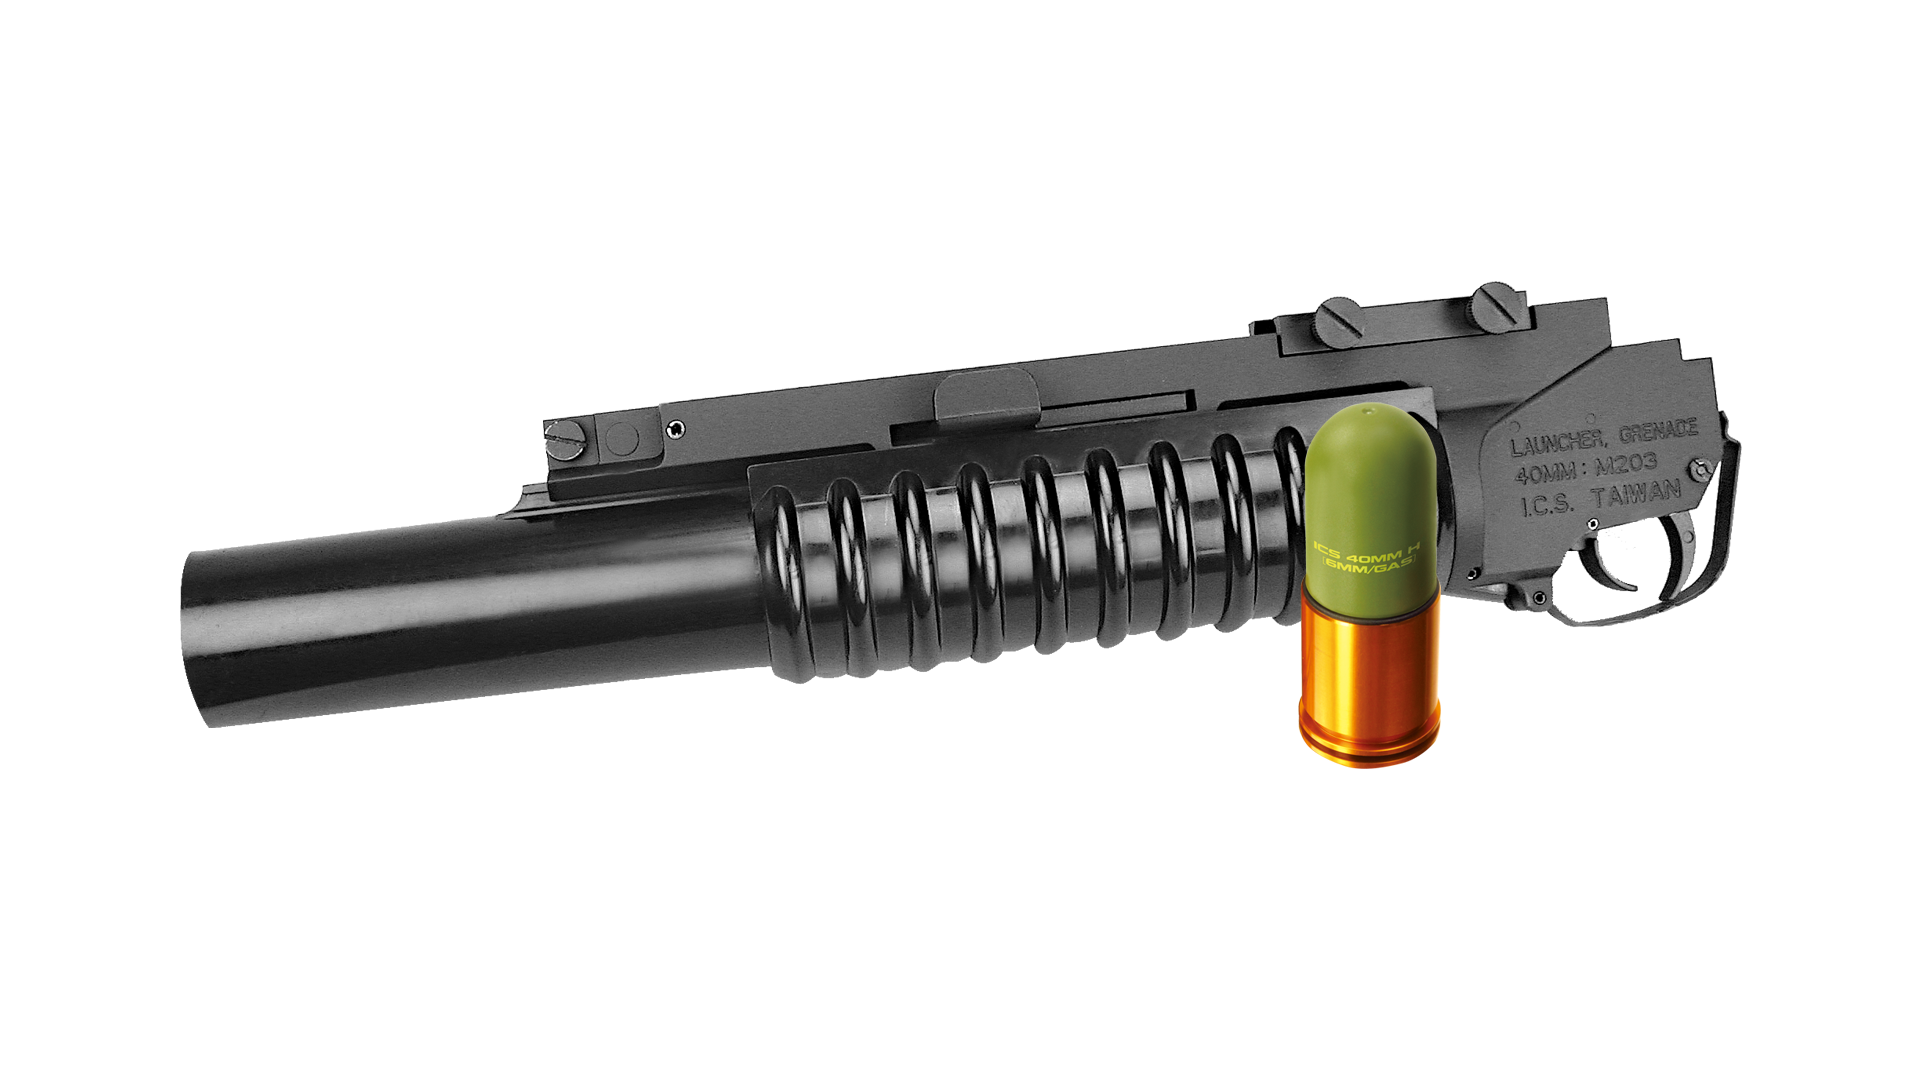 【Discontinued】【MA-159】M203 GRENADE LAUNCHER (Incl. One 40mm Lightweight Grenade)